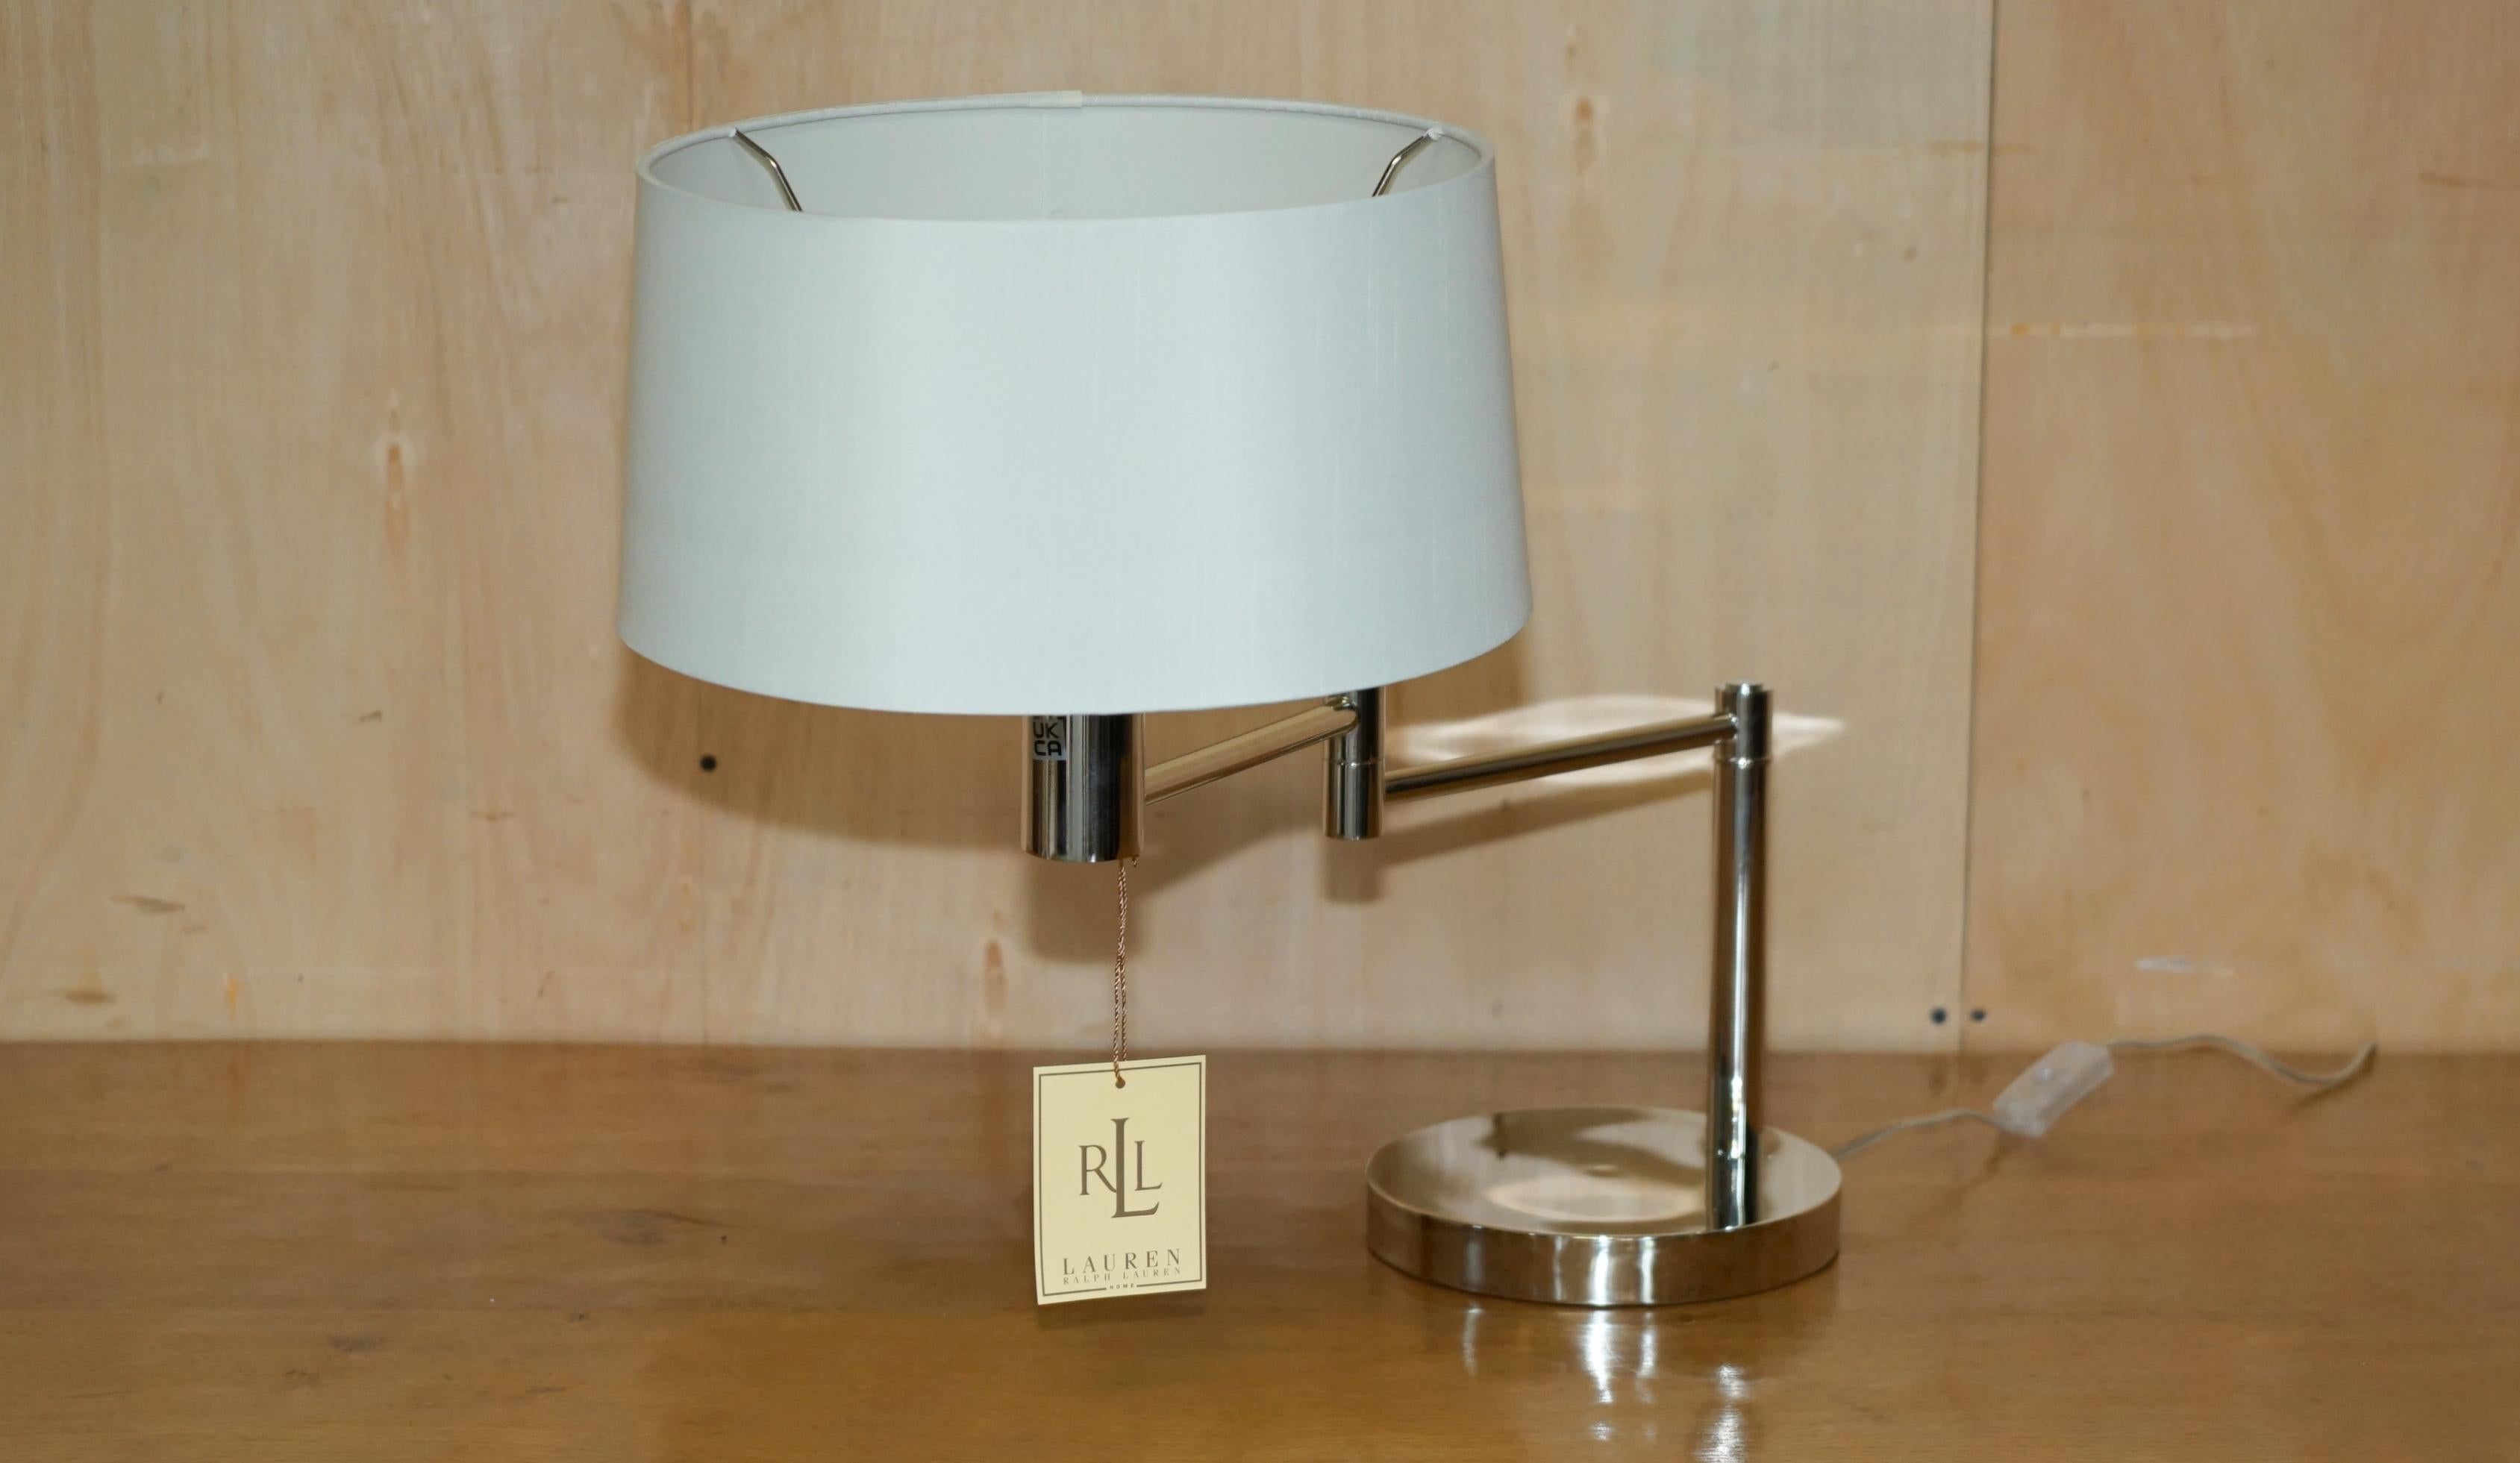 Royal House Antiques

Royal House Antiques is delighted to offer for sale 1 of 8 brand new in the original box Ralph Lauren Articulated swing arm chrome lamp

This lamp is part of a massive suite of Ralph Lauren lamps we bought for a show home that